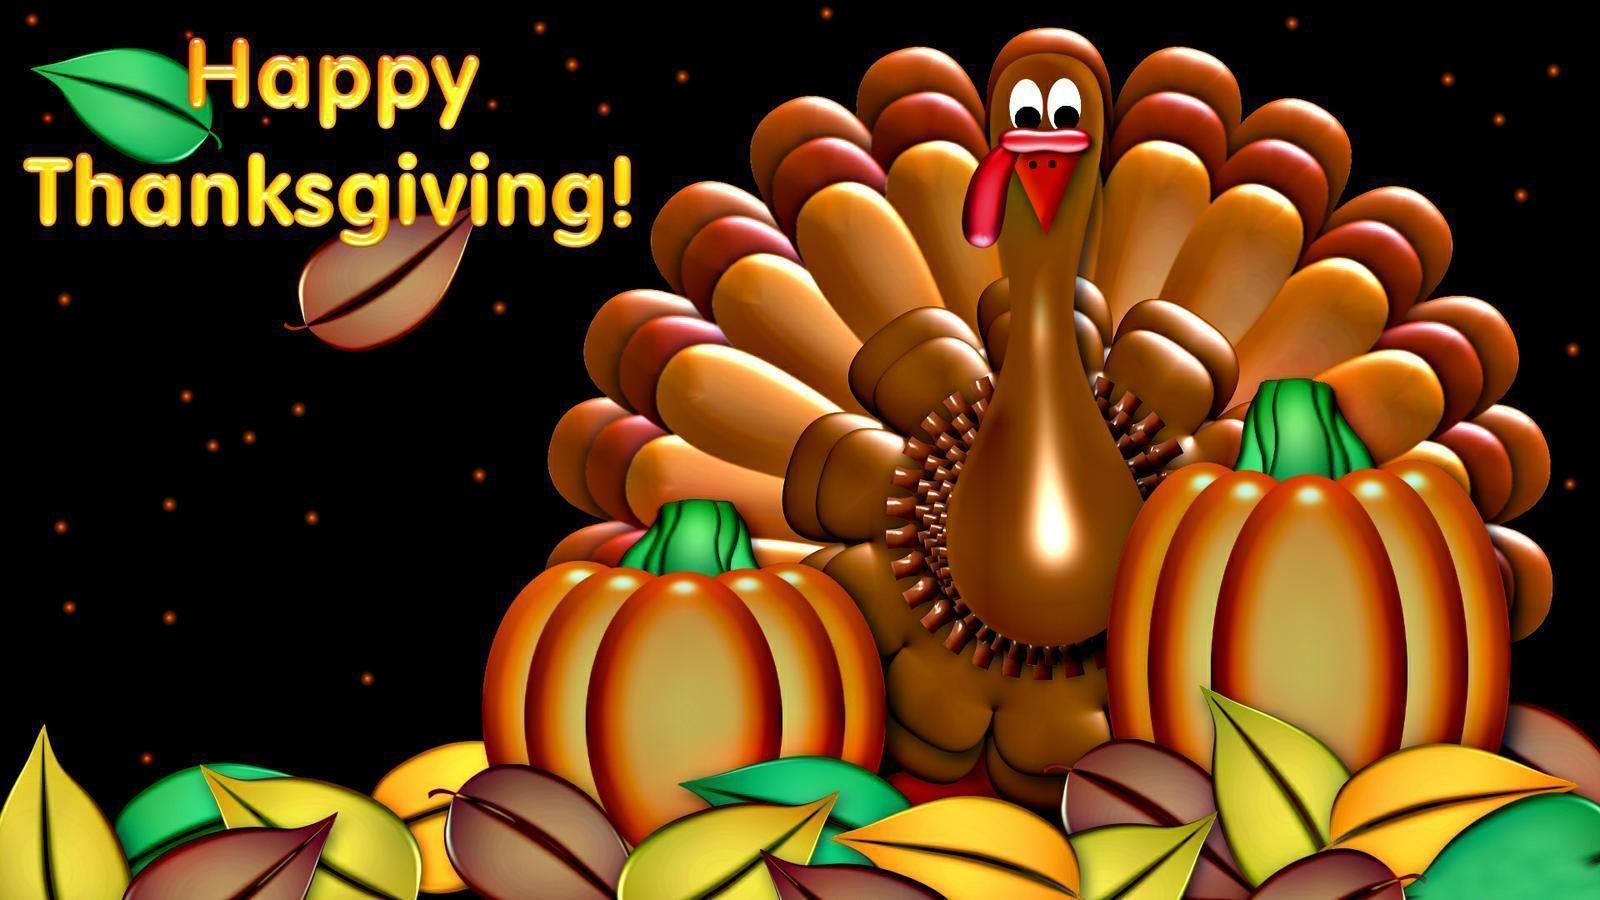 Happy Thanks Giving Wallpapers 2017